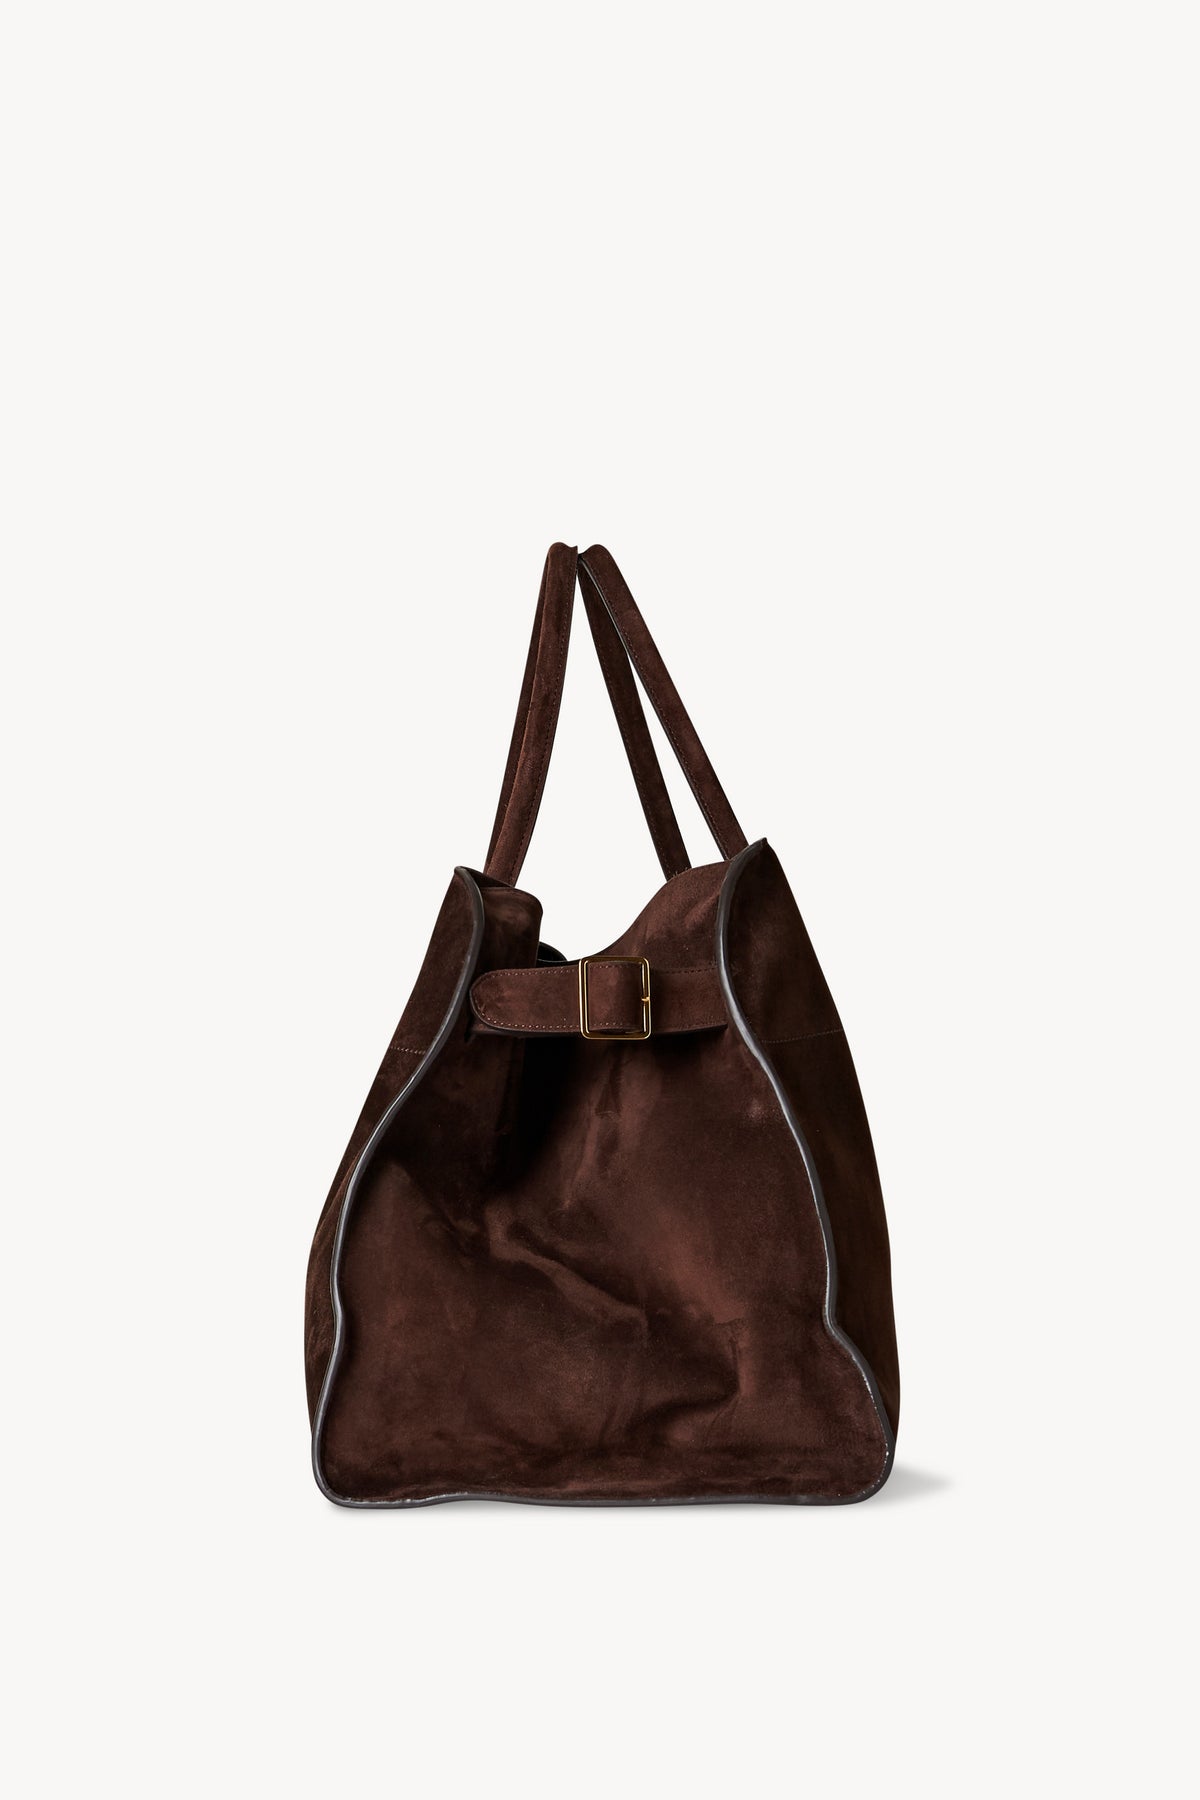 Margaux 17 Leather Tote Bag in Purple - The Row